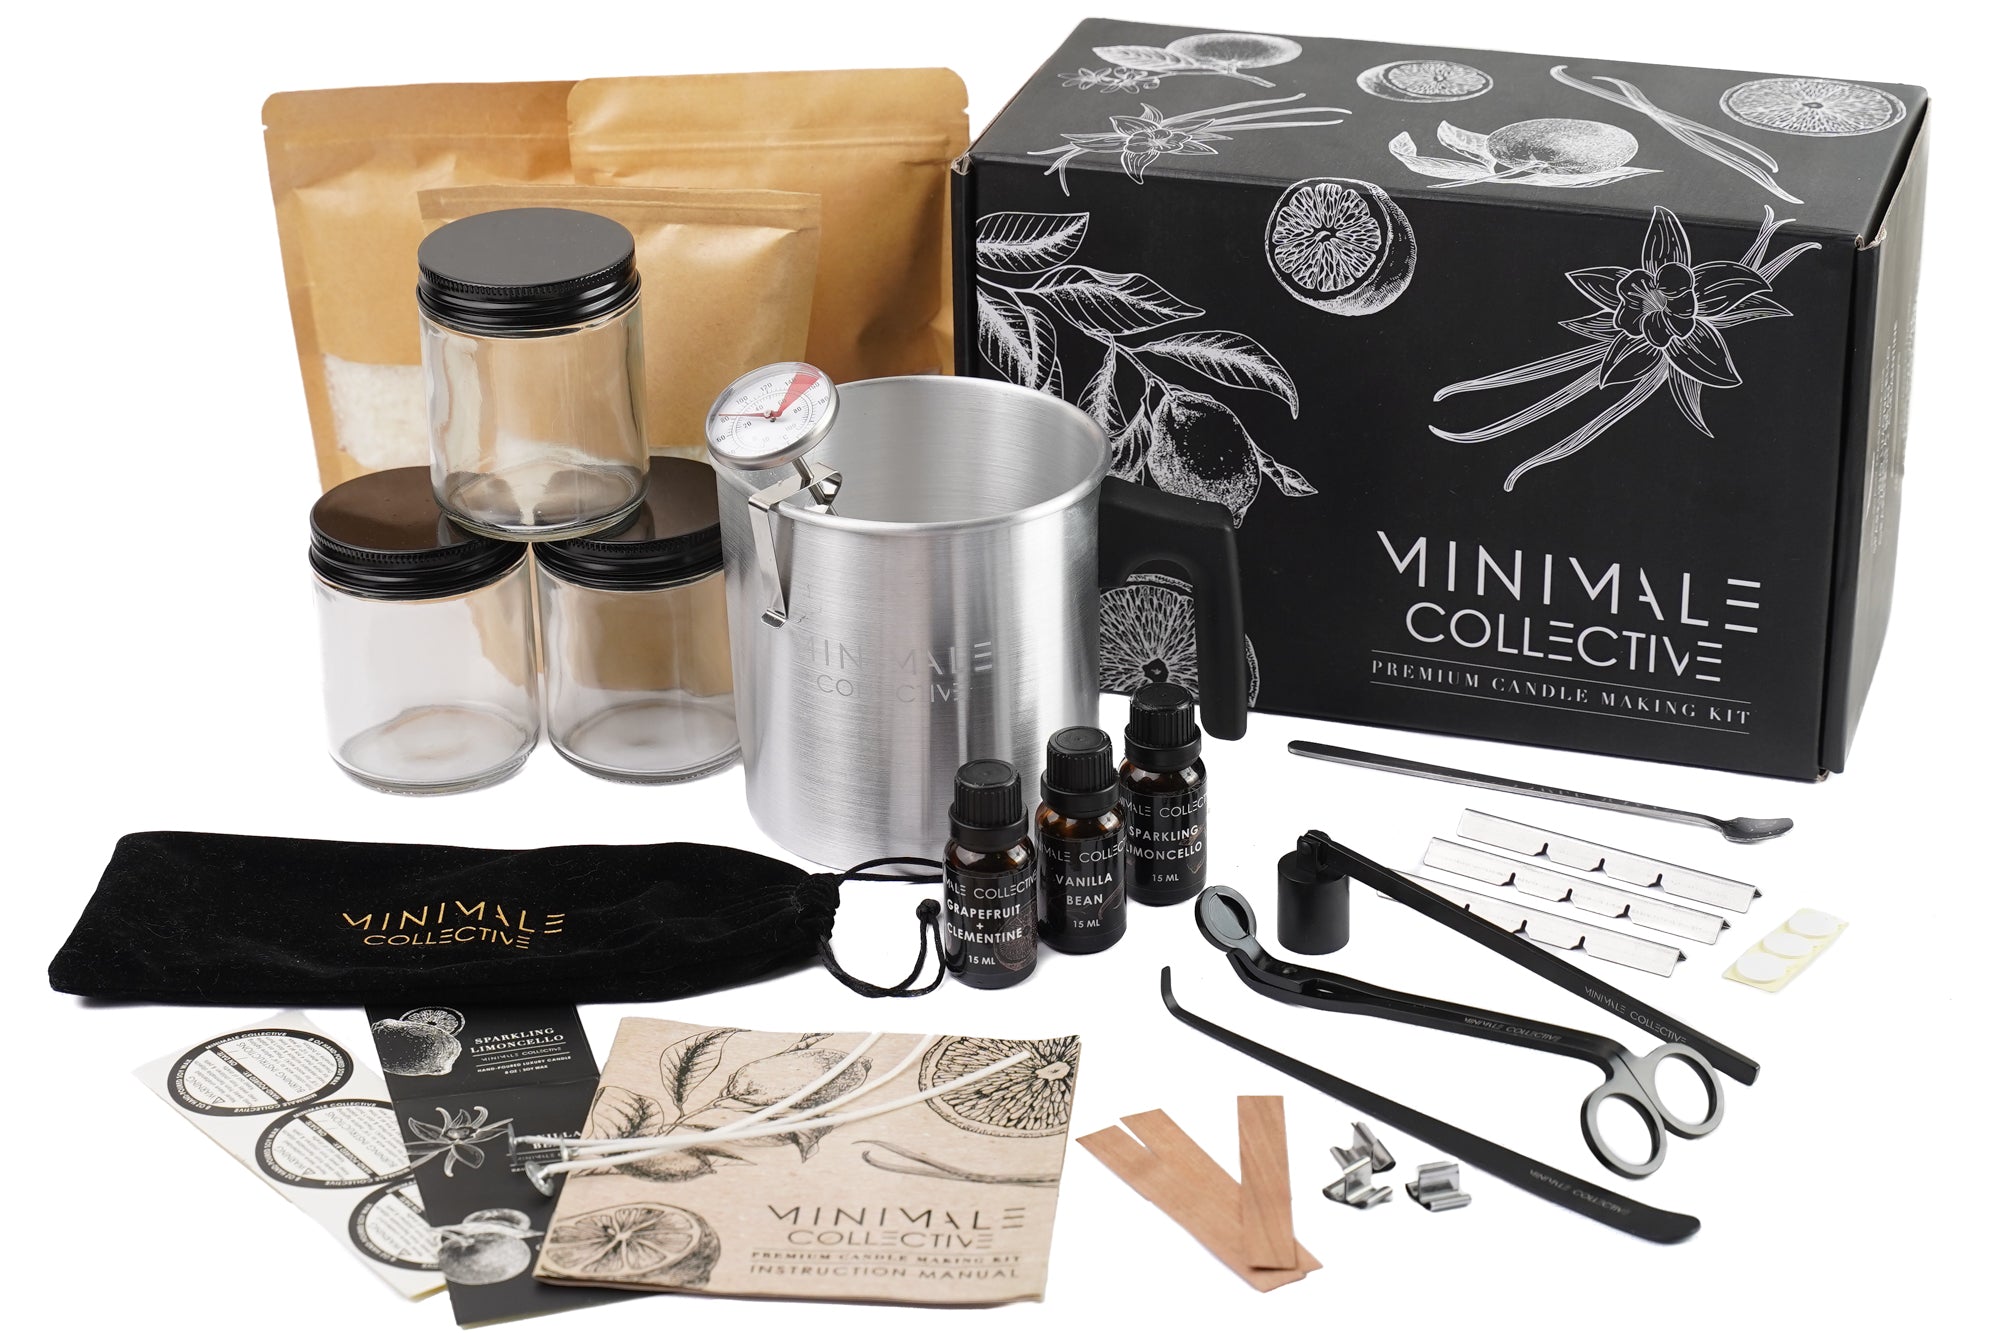  Minimale Collective Luxury Candle Making Kit for